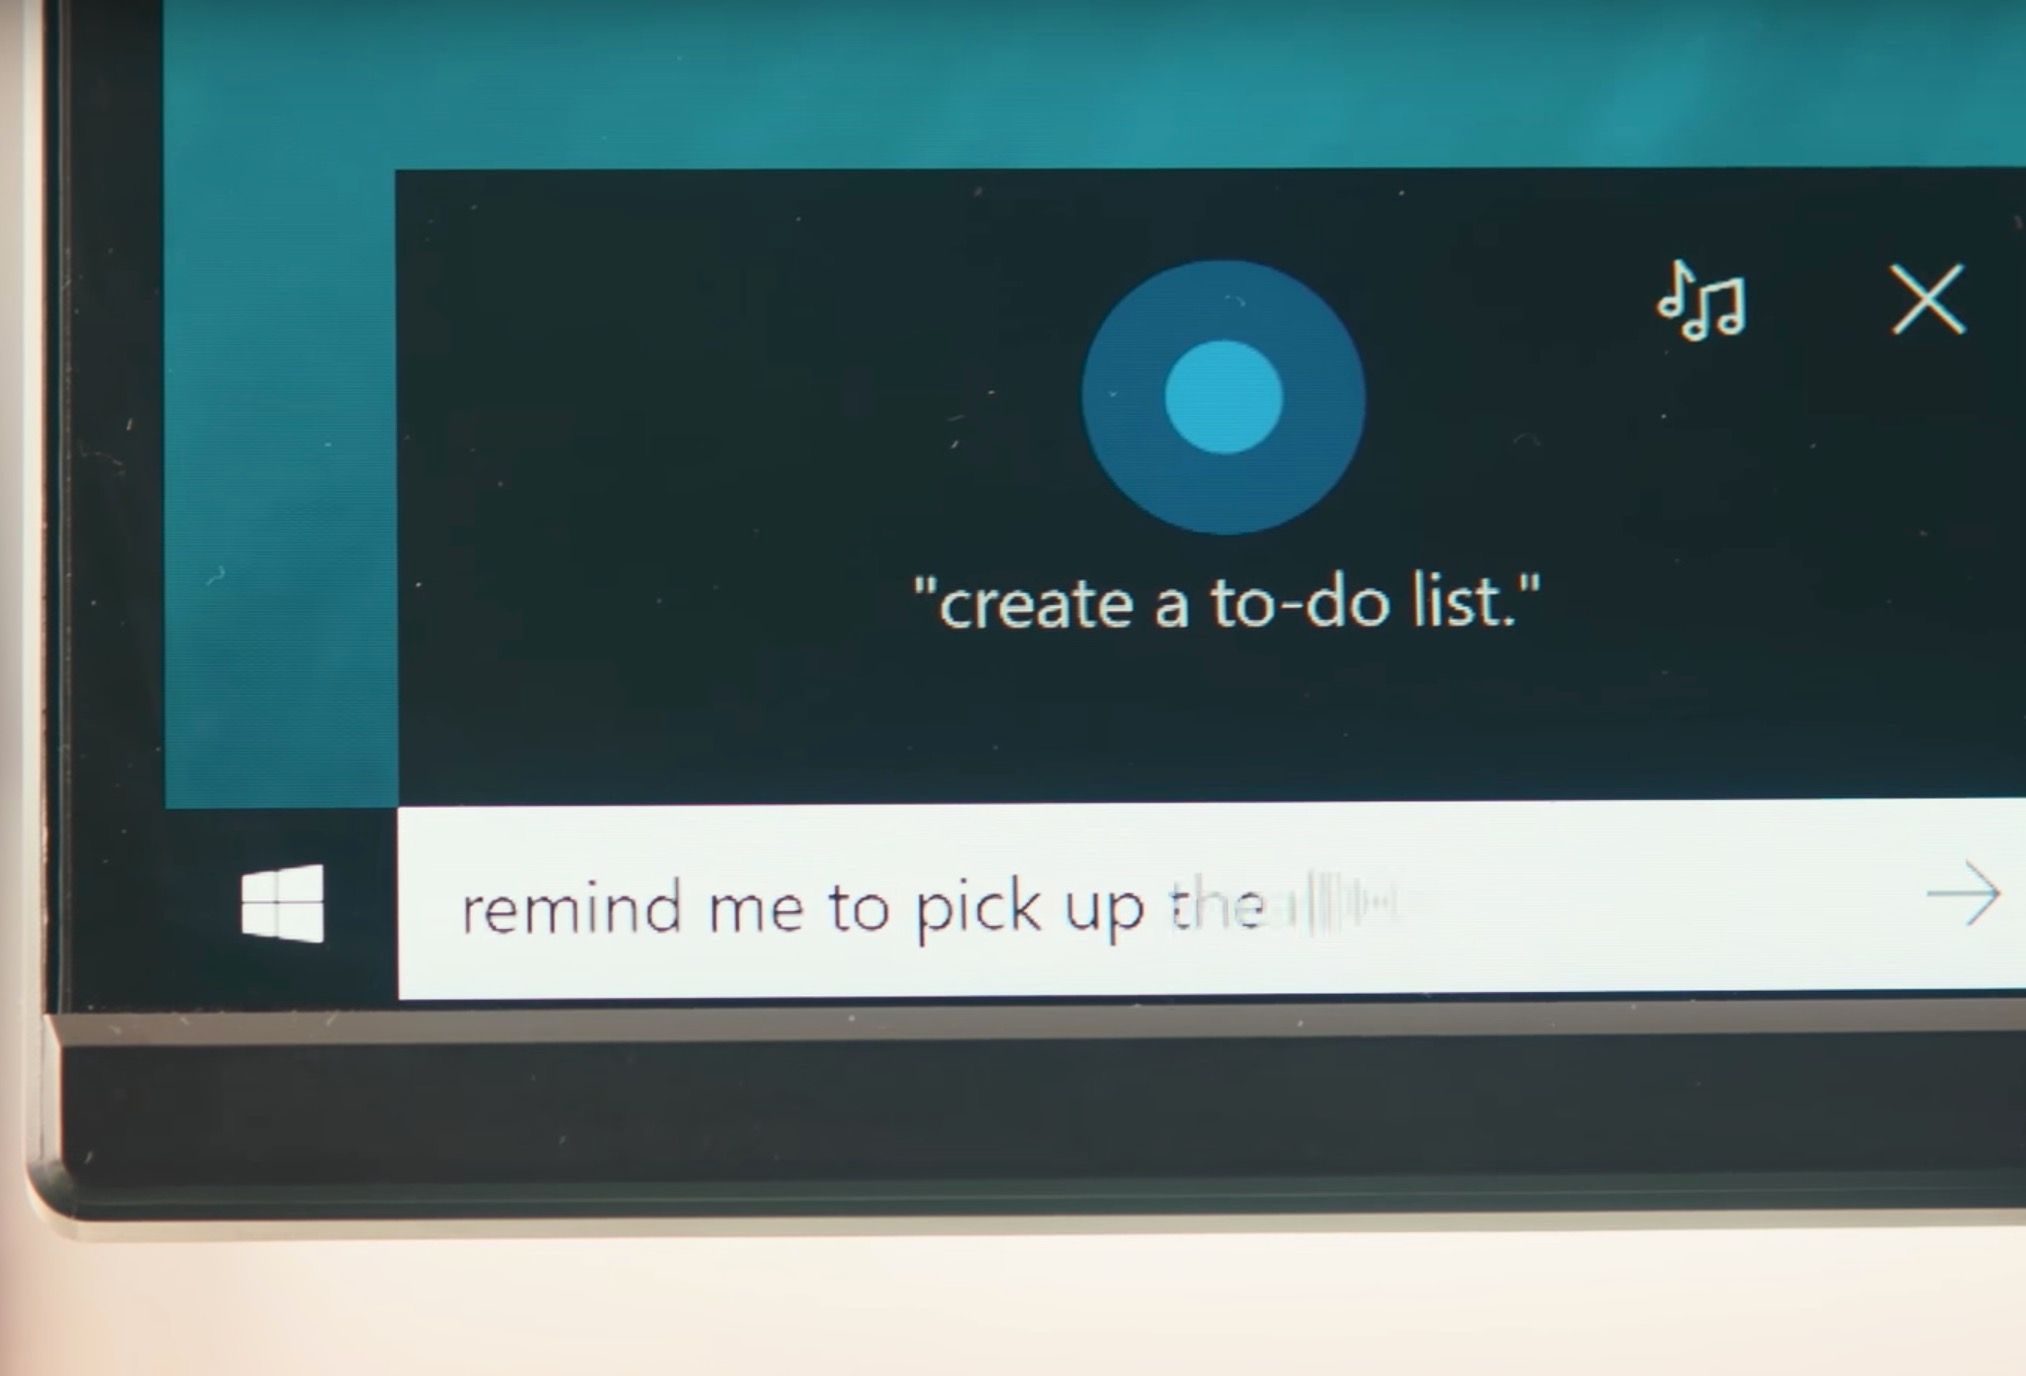 microsoft cortana skills which are available now and how do they work image 2